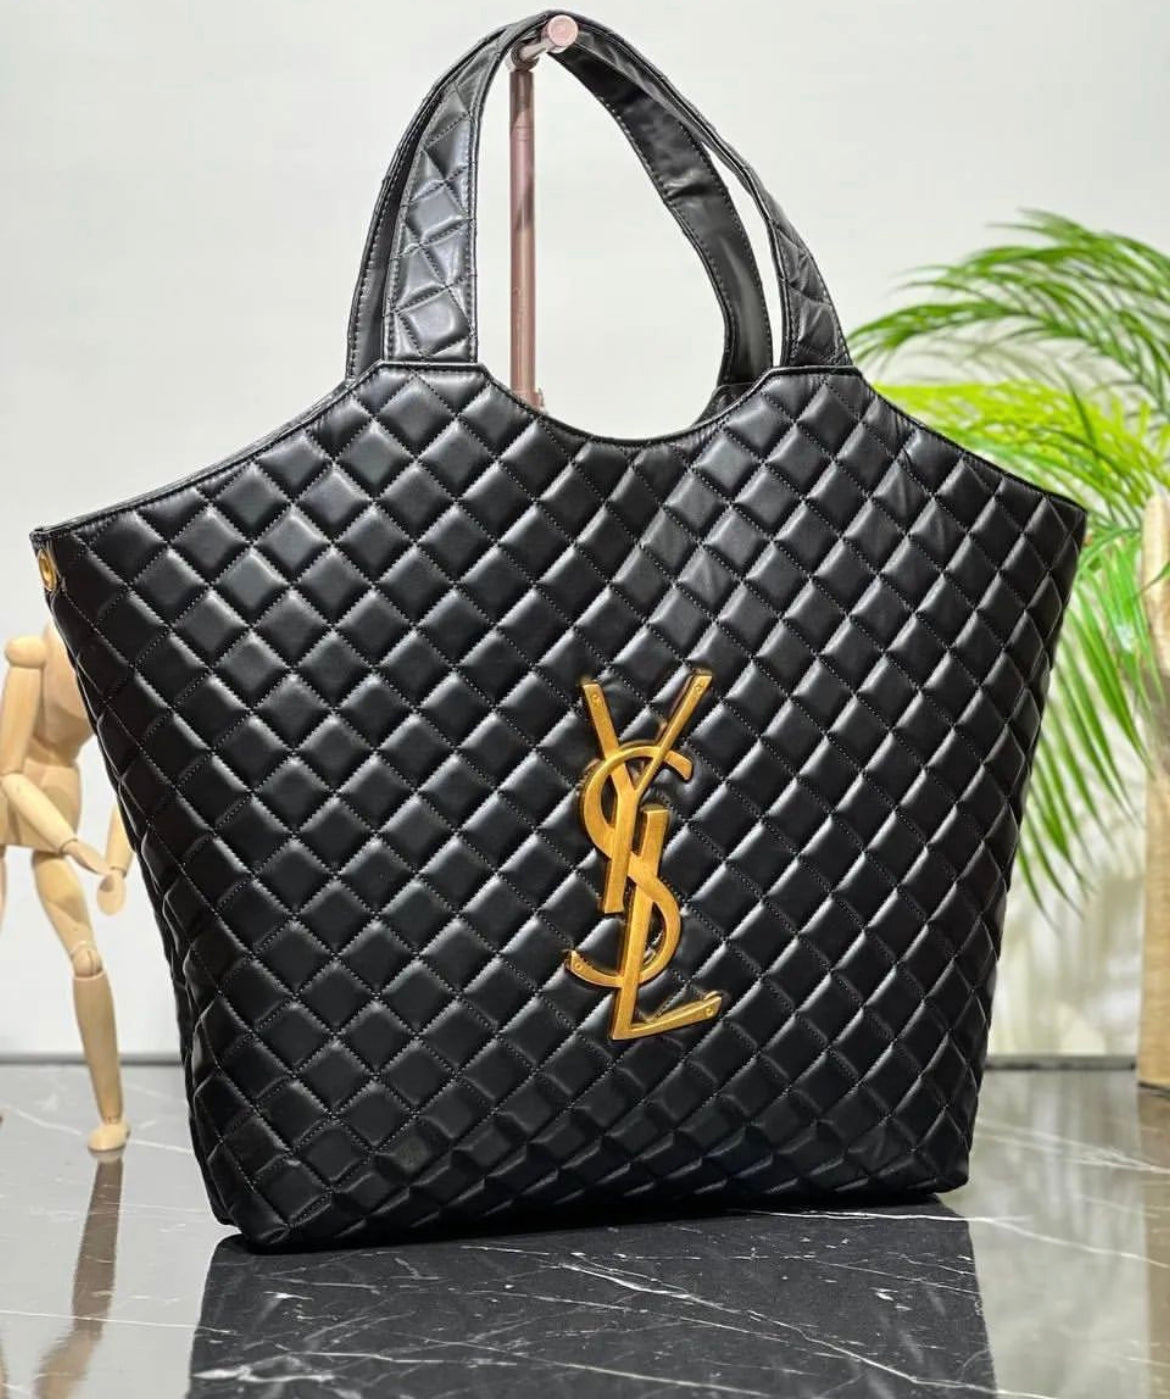 The YSL Icare Maxi shopping bag 🤍 Dm or visit us!